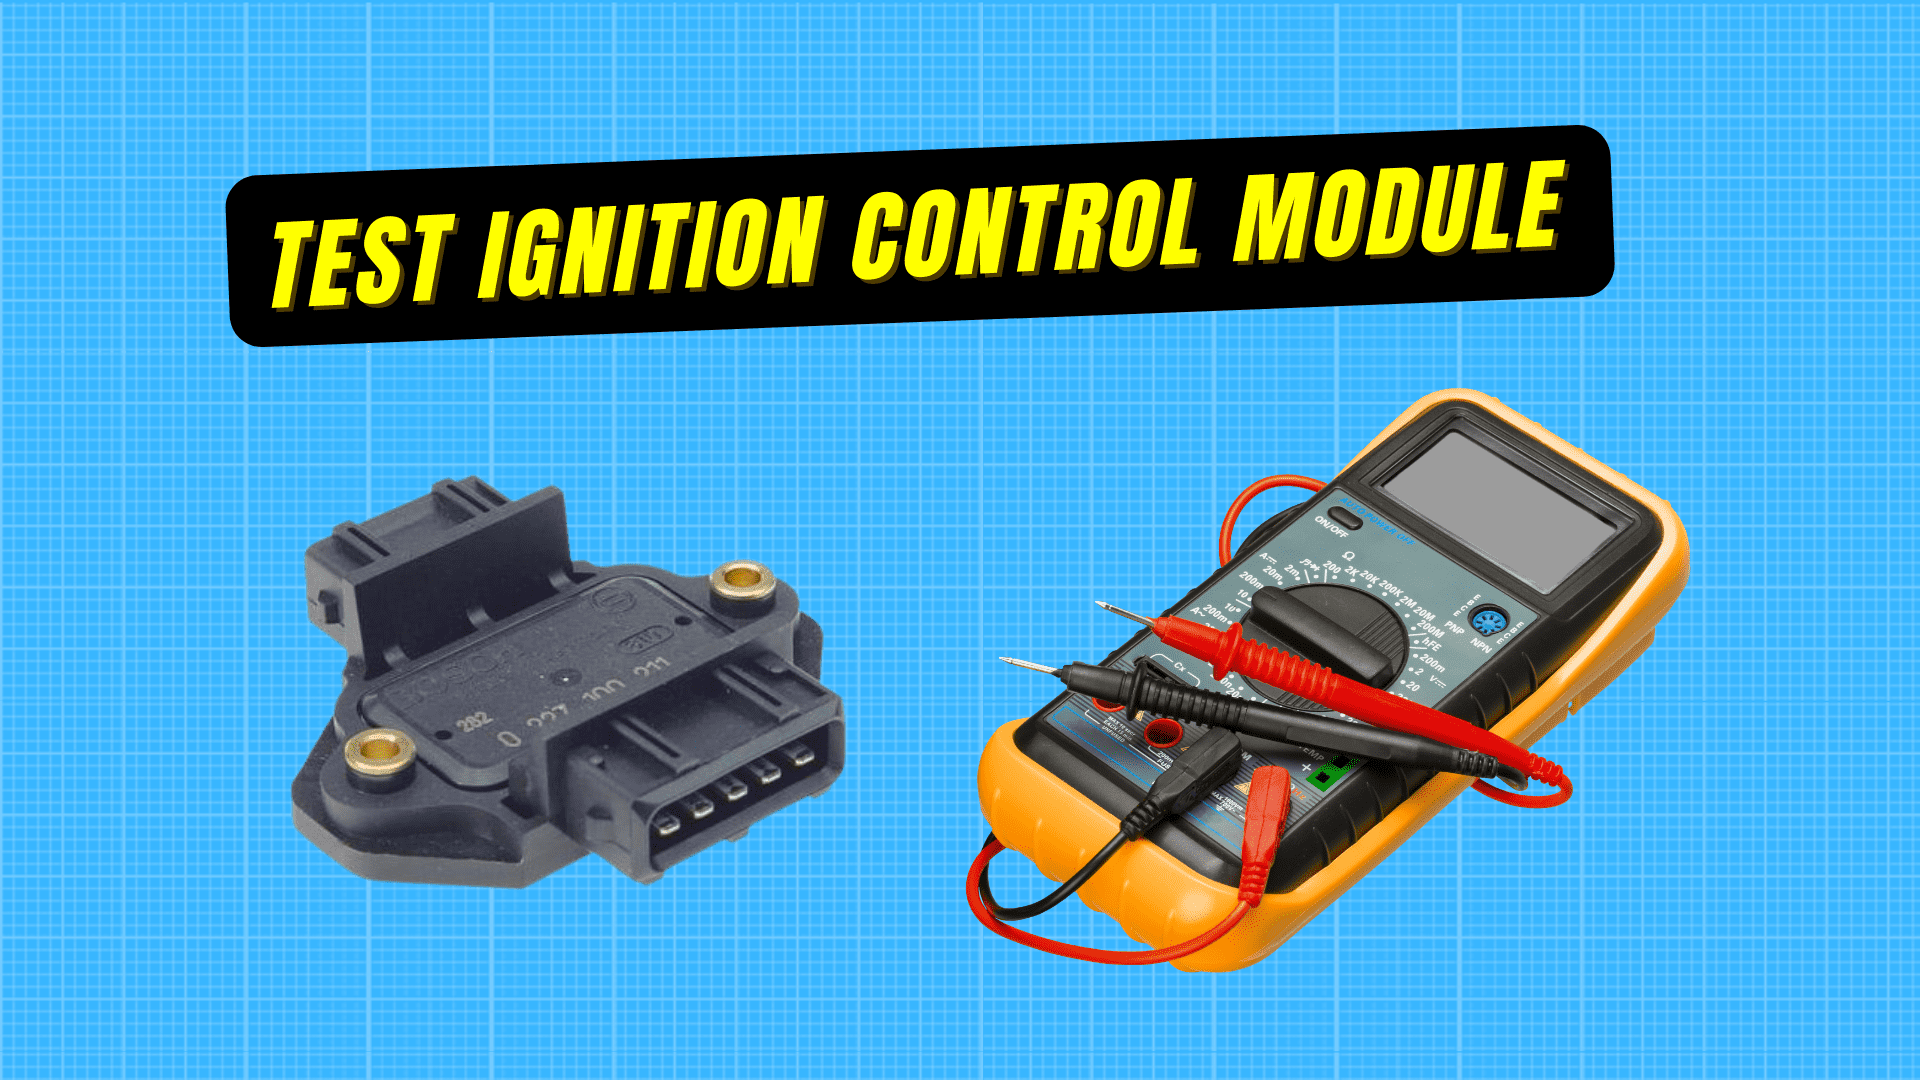 How to Test Ignition Control Module with Multimeter